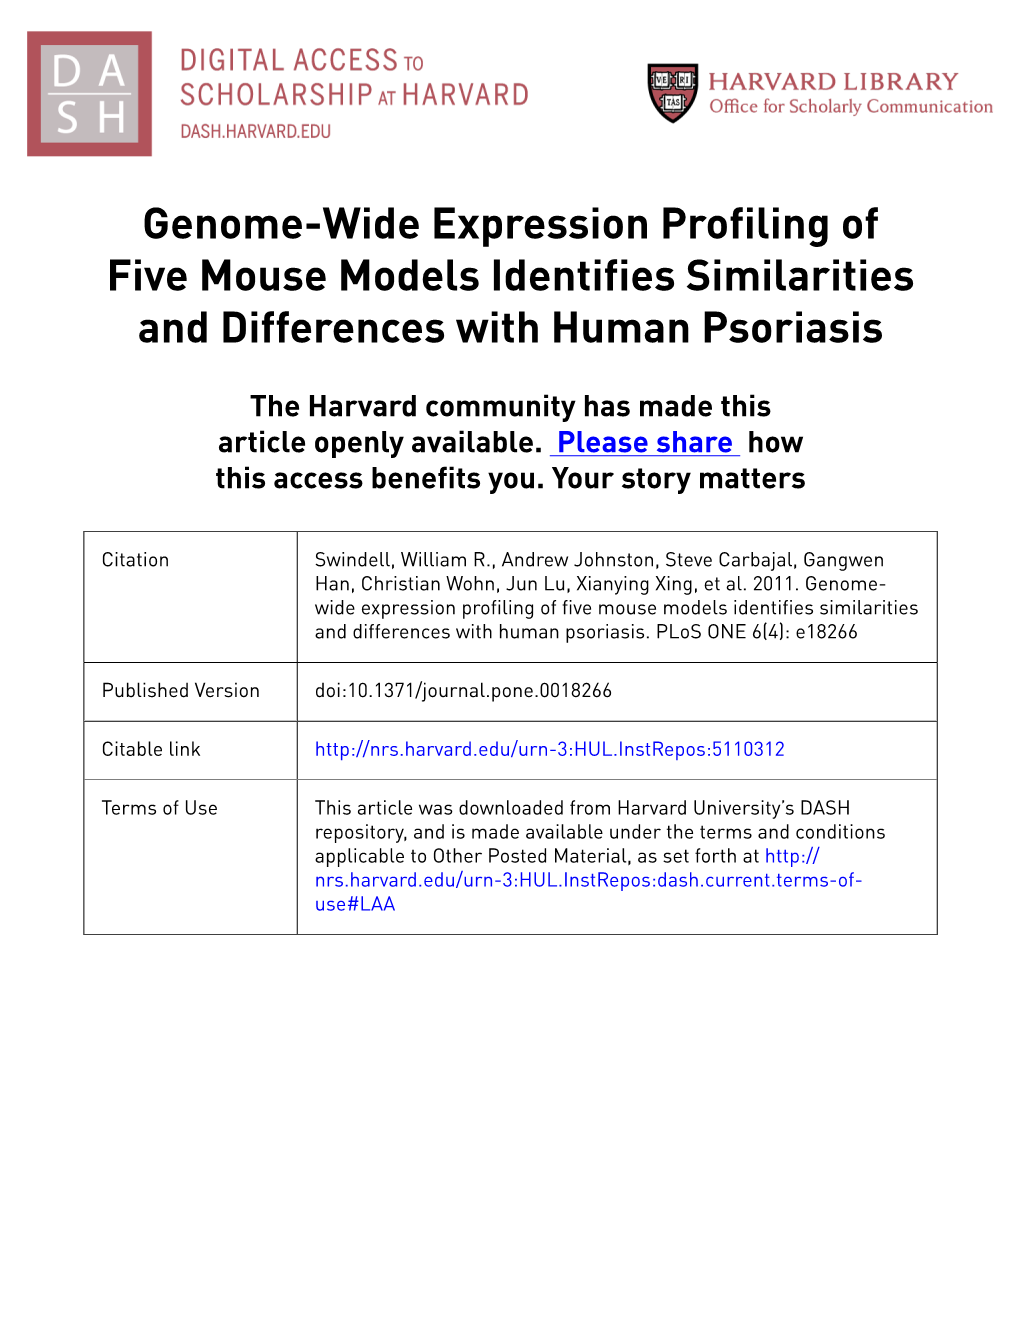 Genome-Wide Expression Profiling of Five Mouse Models Identifies Similarities and Differences with Human Psoriasis